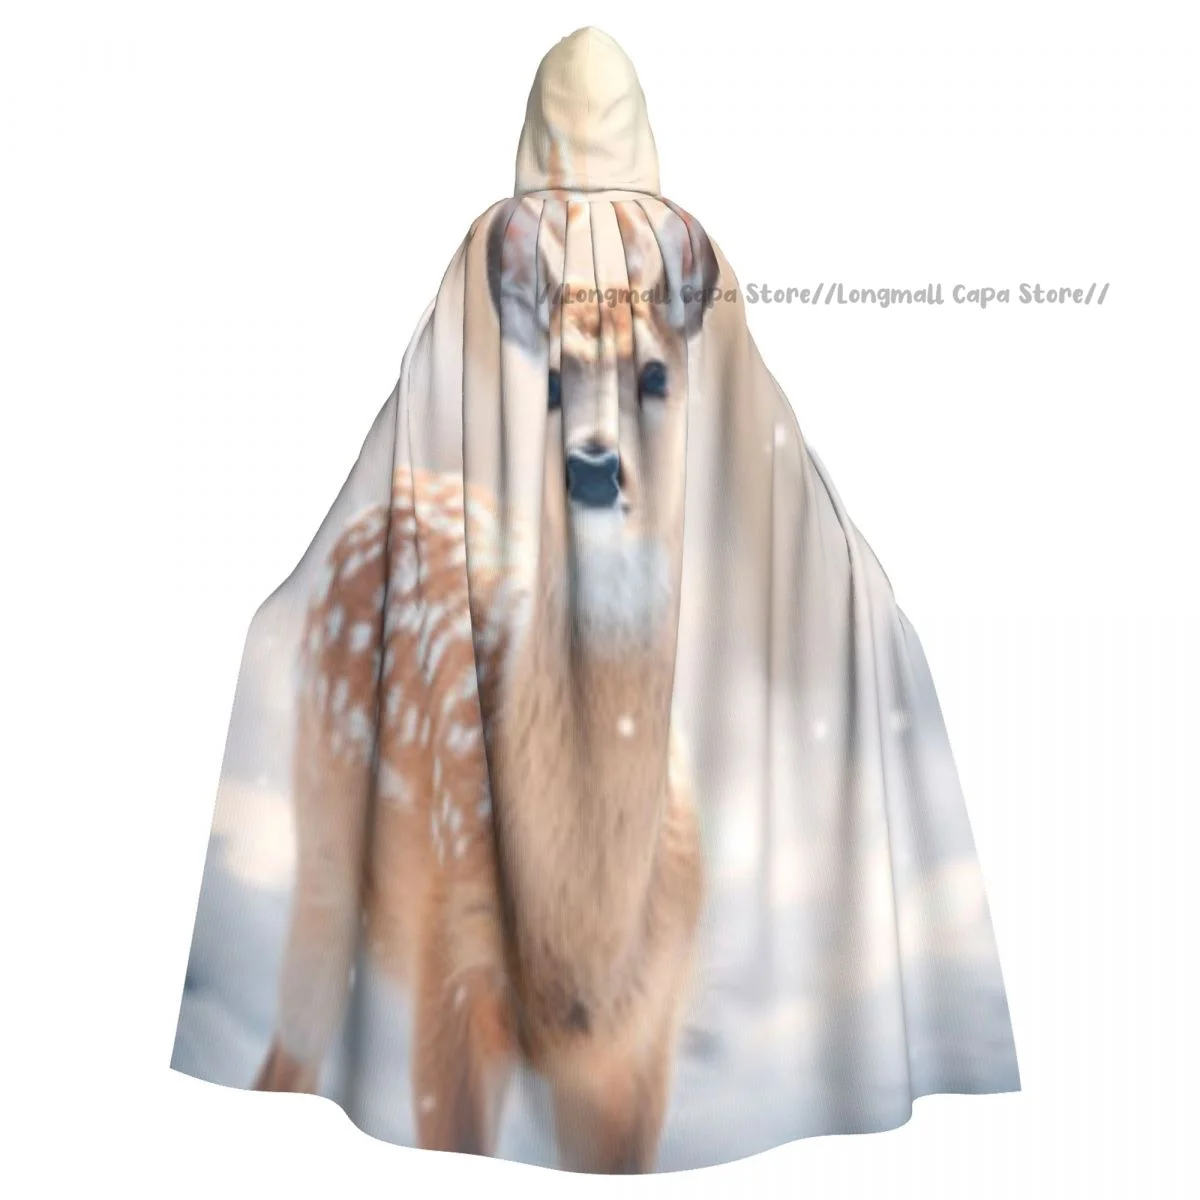 

Deer In Forest With Snow Hooded Cloak Coat Halloween Cosplay Costume Vampire Devil Wizard Cape Gown Party